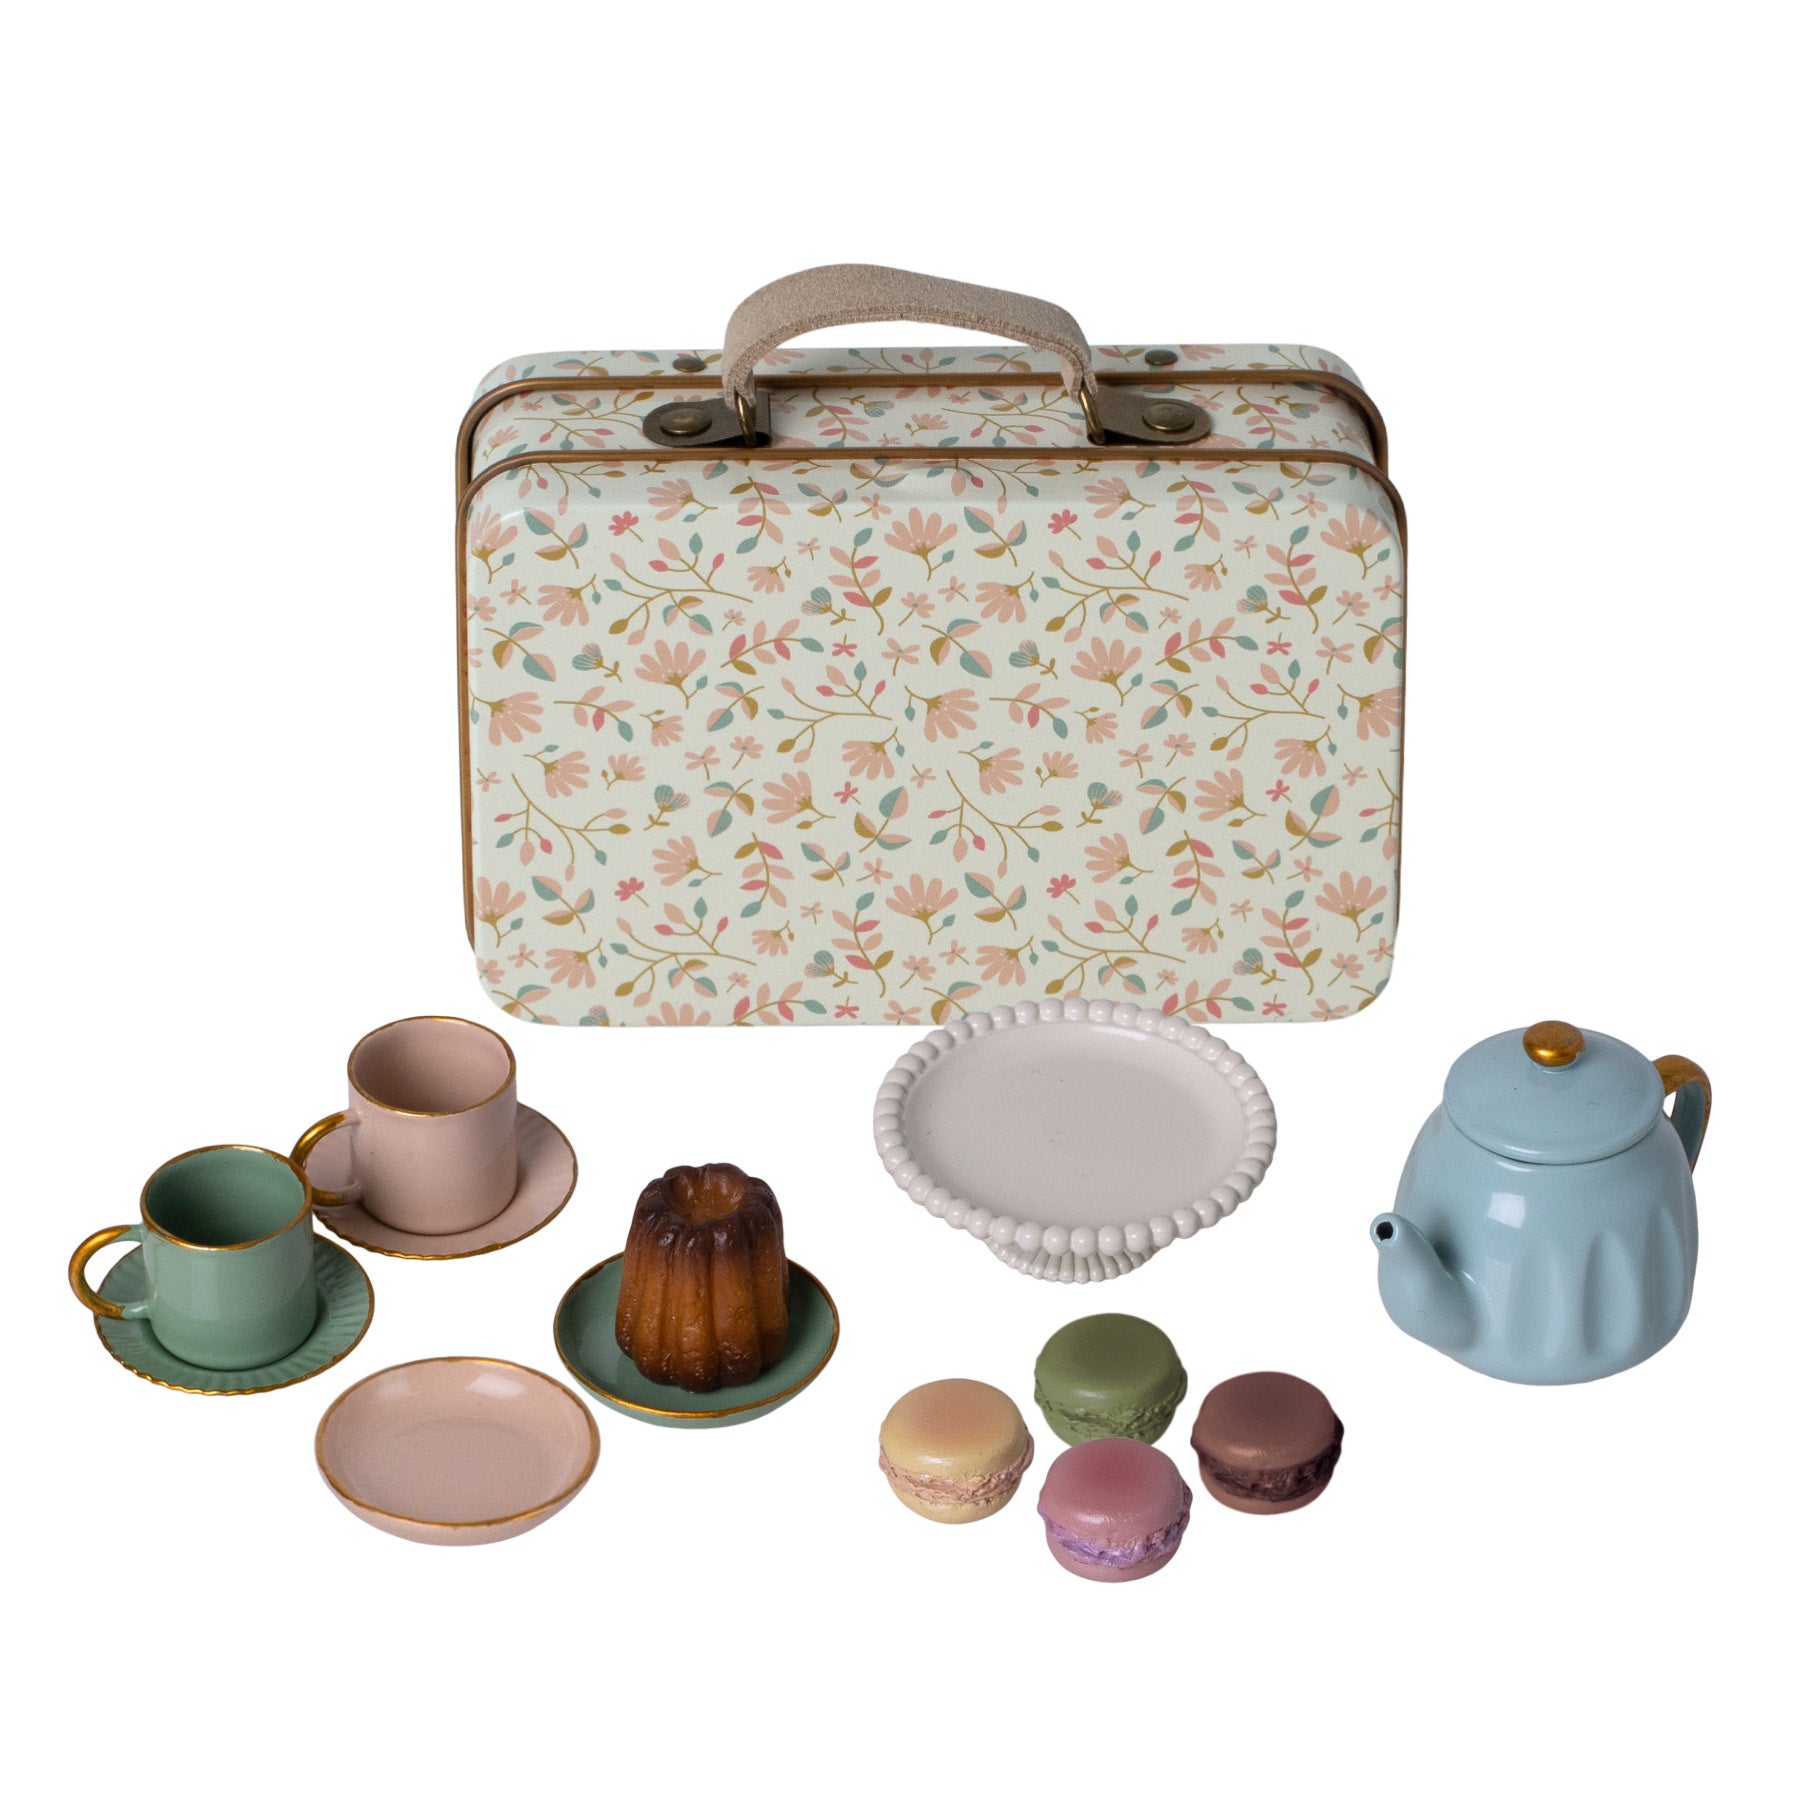 maileg merle patterened metal case with a teapot, cups, saucers and cakes